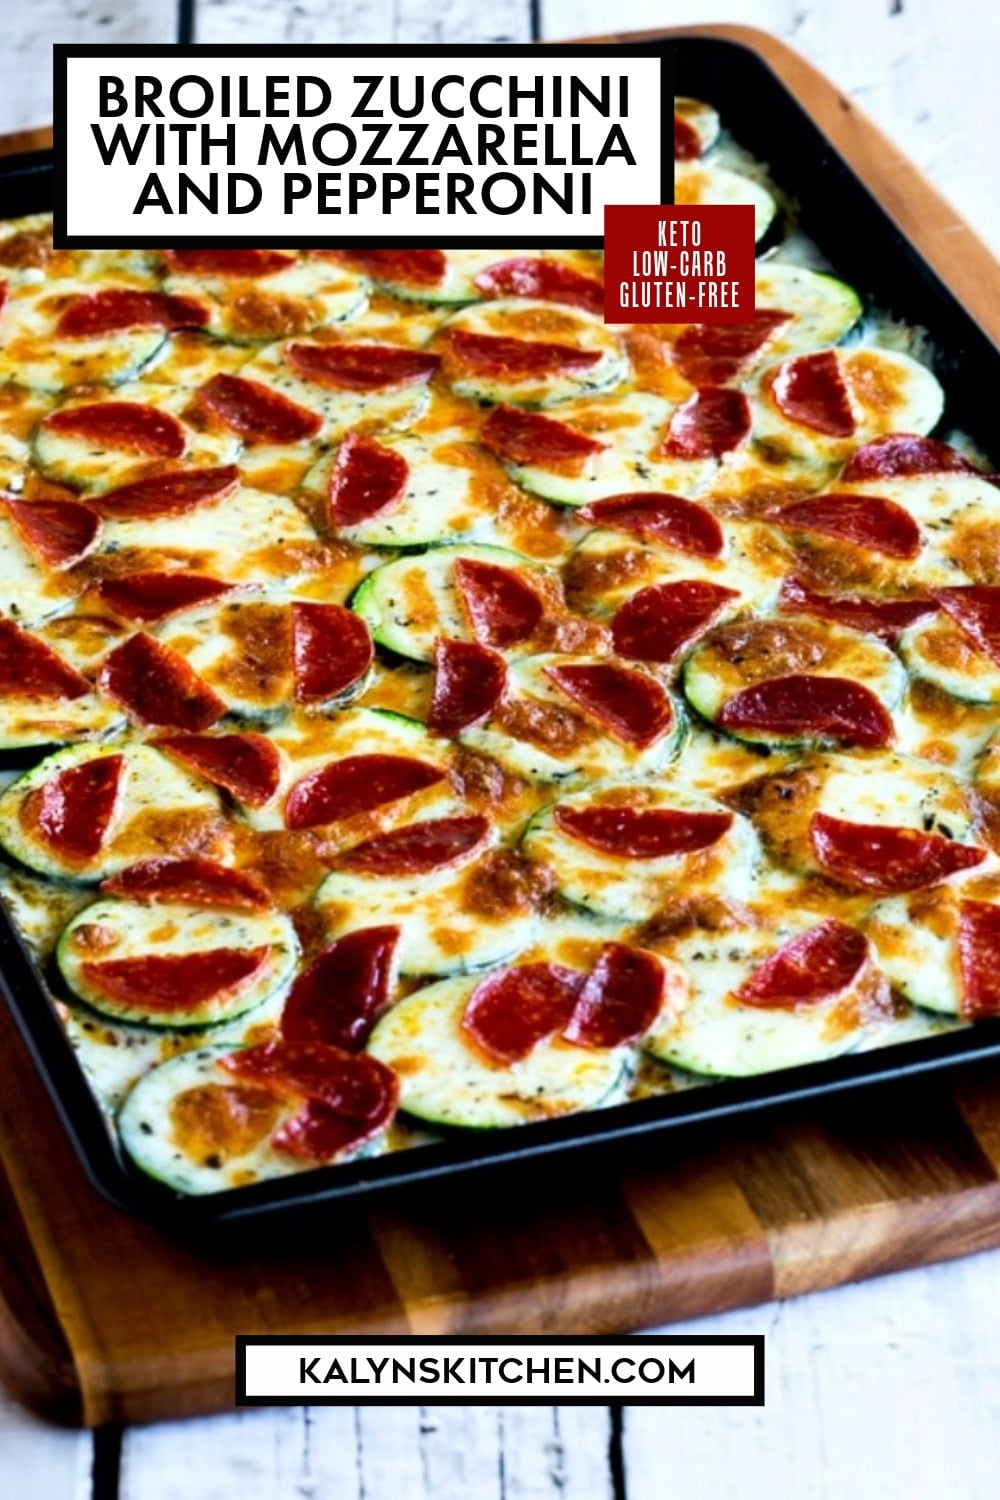 Pinterest image of Broiled Zucchini with Mozzarella and Pepperoni